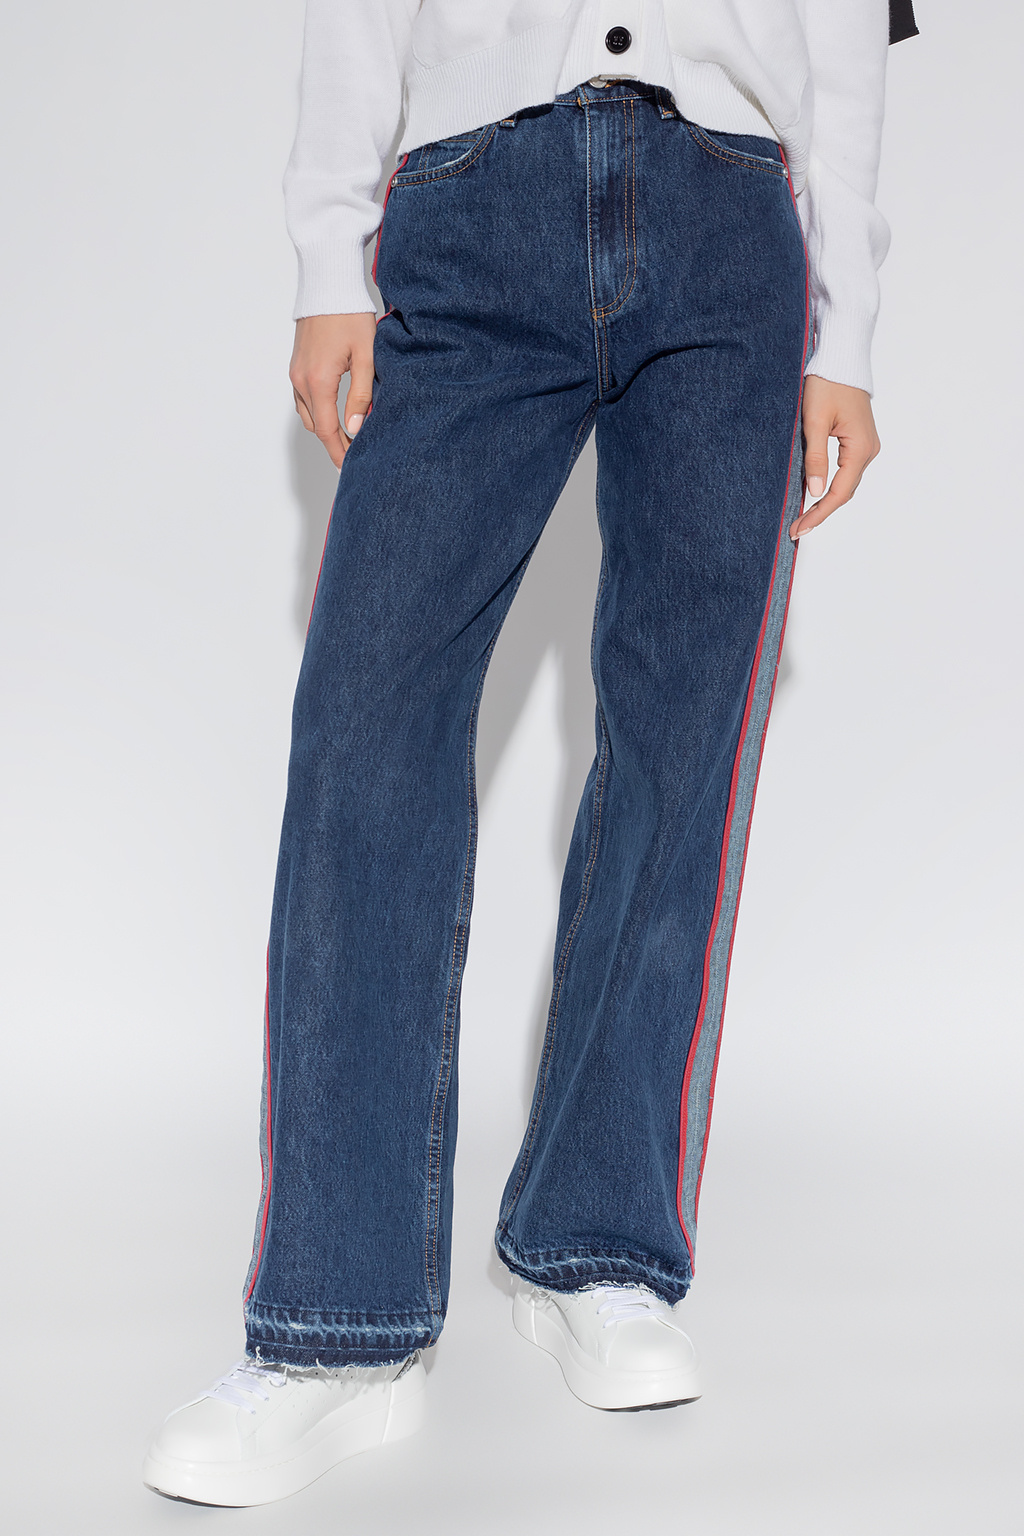 Red valentino ankle Side-stripe jeans